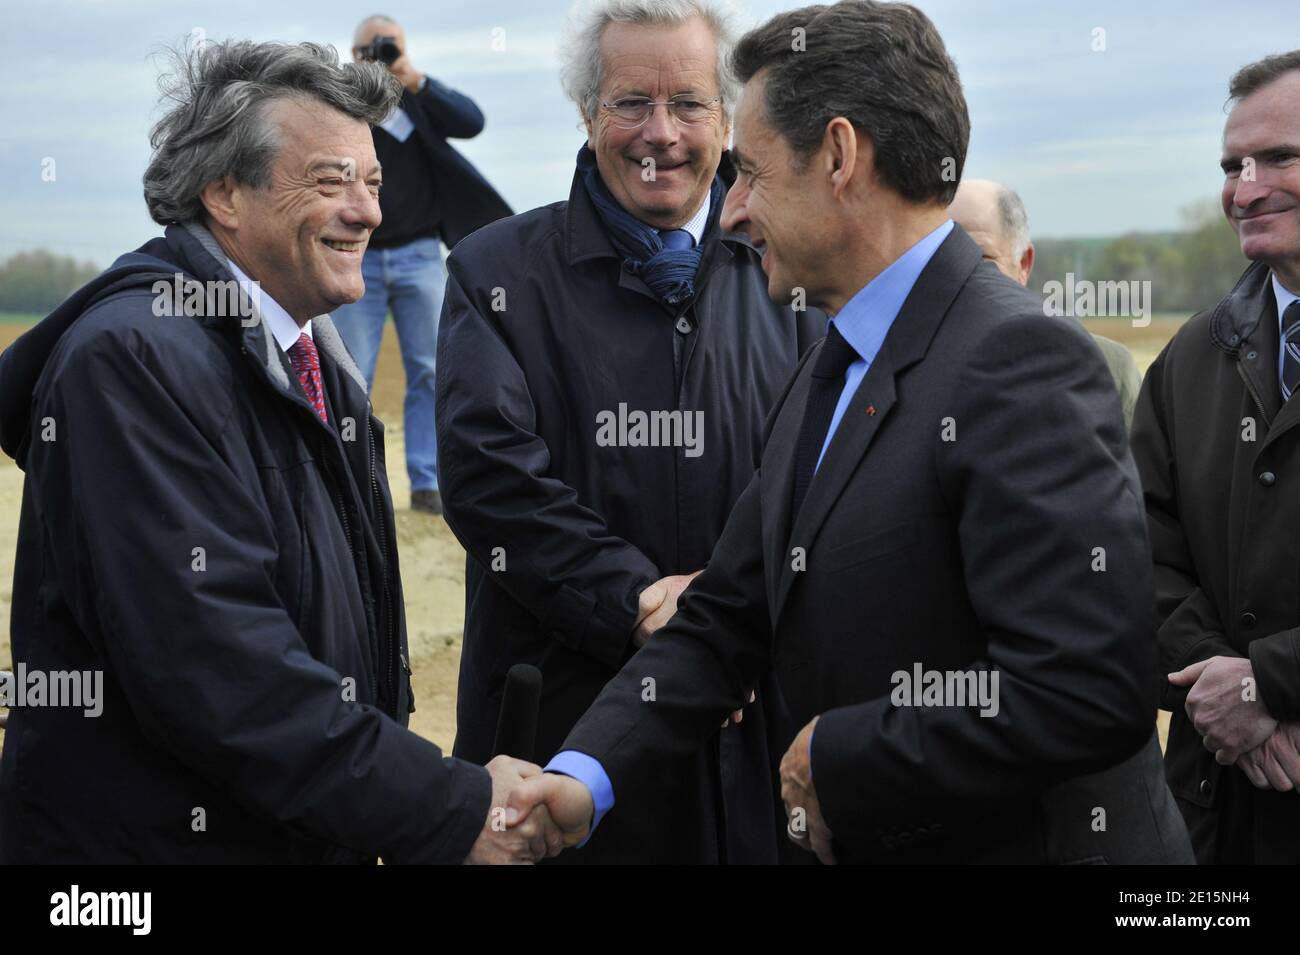 French President Nicolas Sarkozy recieved by Jean-Louis Borloo visits the building site of A29 pulling down in Licourt, Somme, France on April 5, 2011. Photo by Thierry Orban/ABACAPRESS.COM Stock Photo